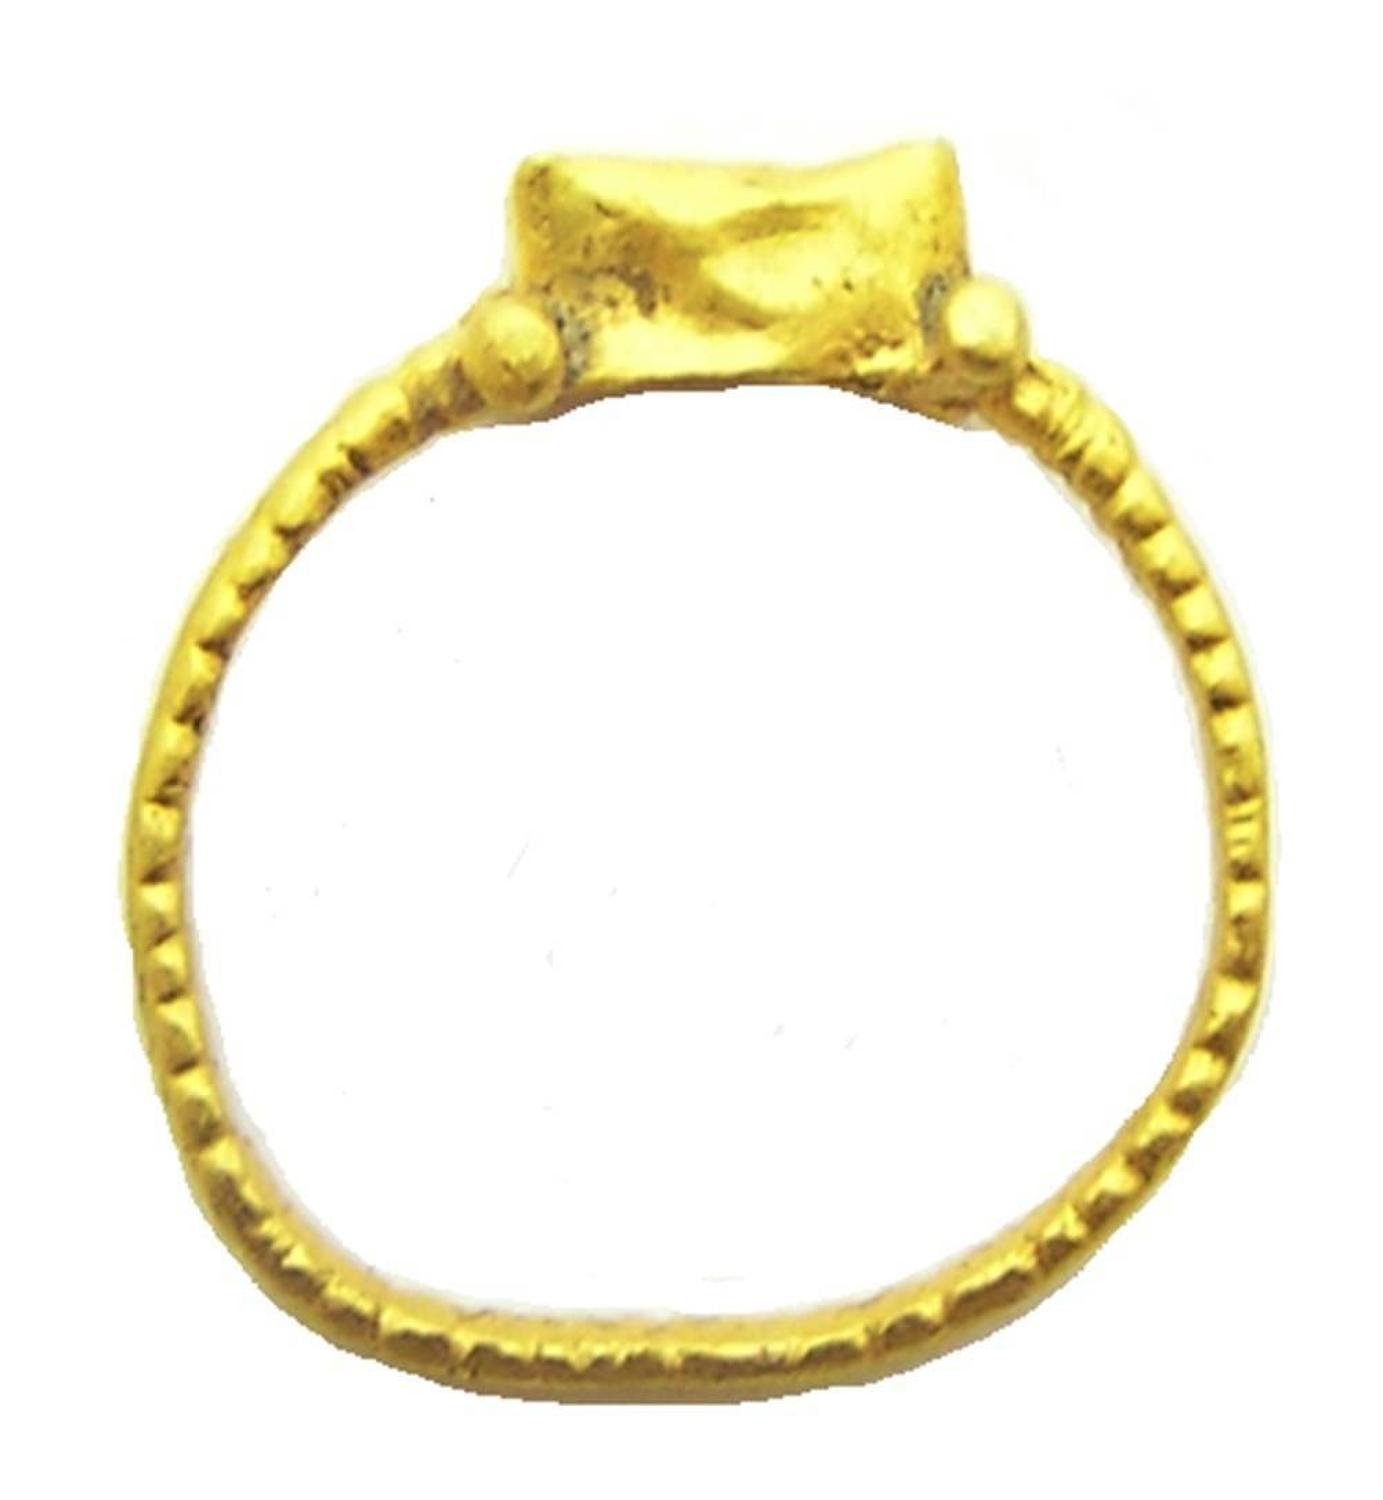 Excavated Late Roman Gold Finger Ring